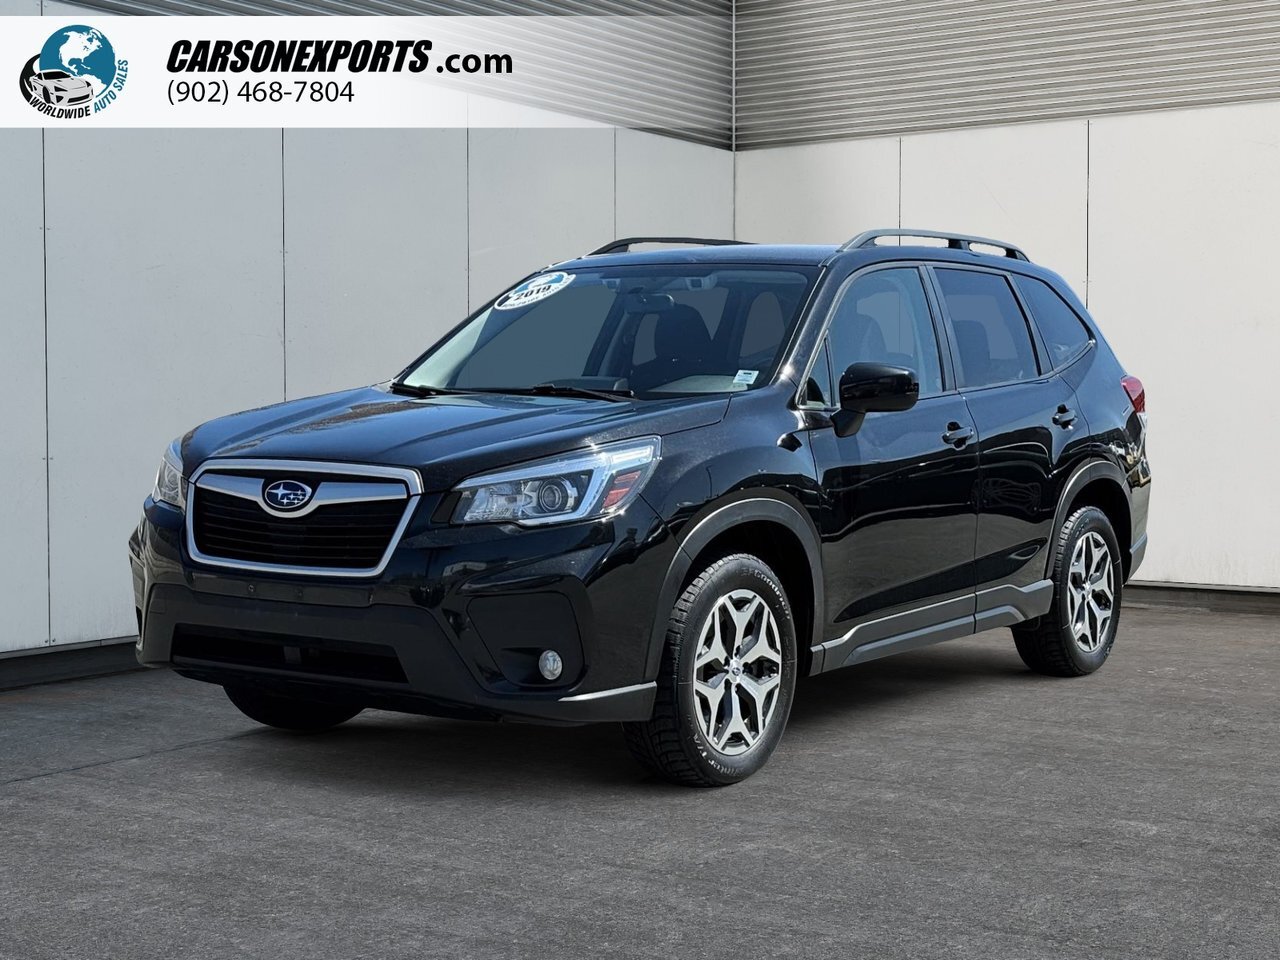 2019 Subaru Forester 2.5i The best place to buy a used car. Period.